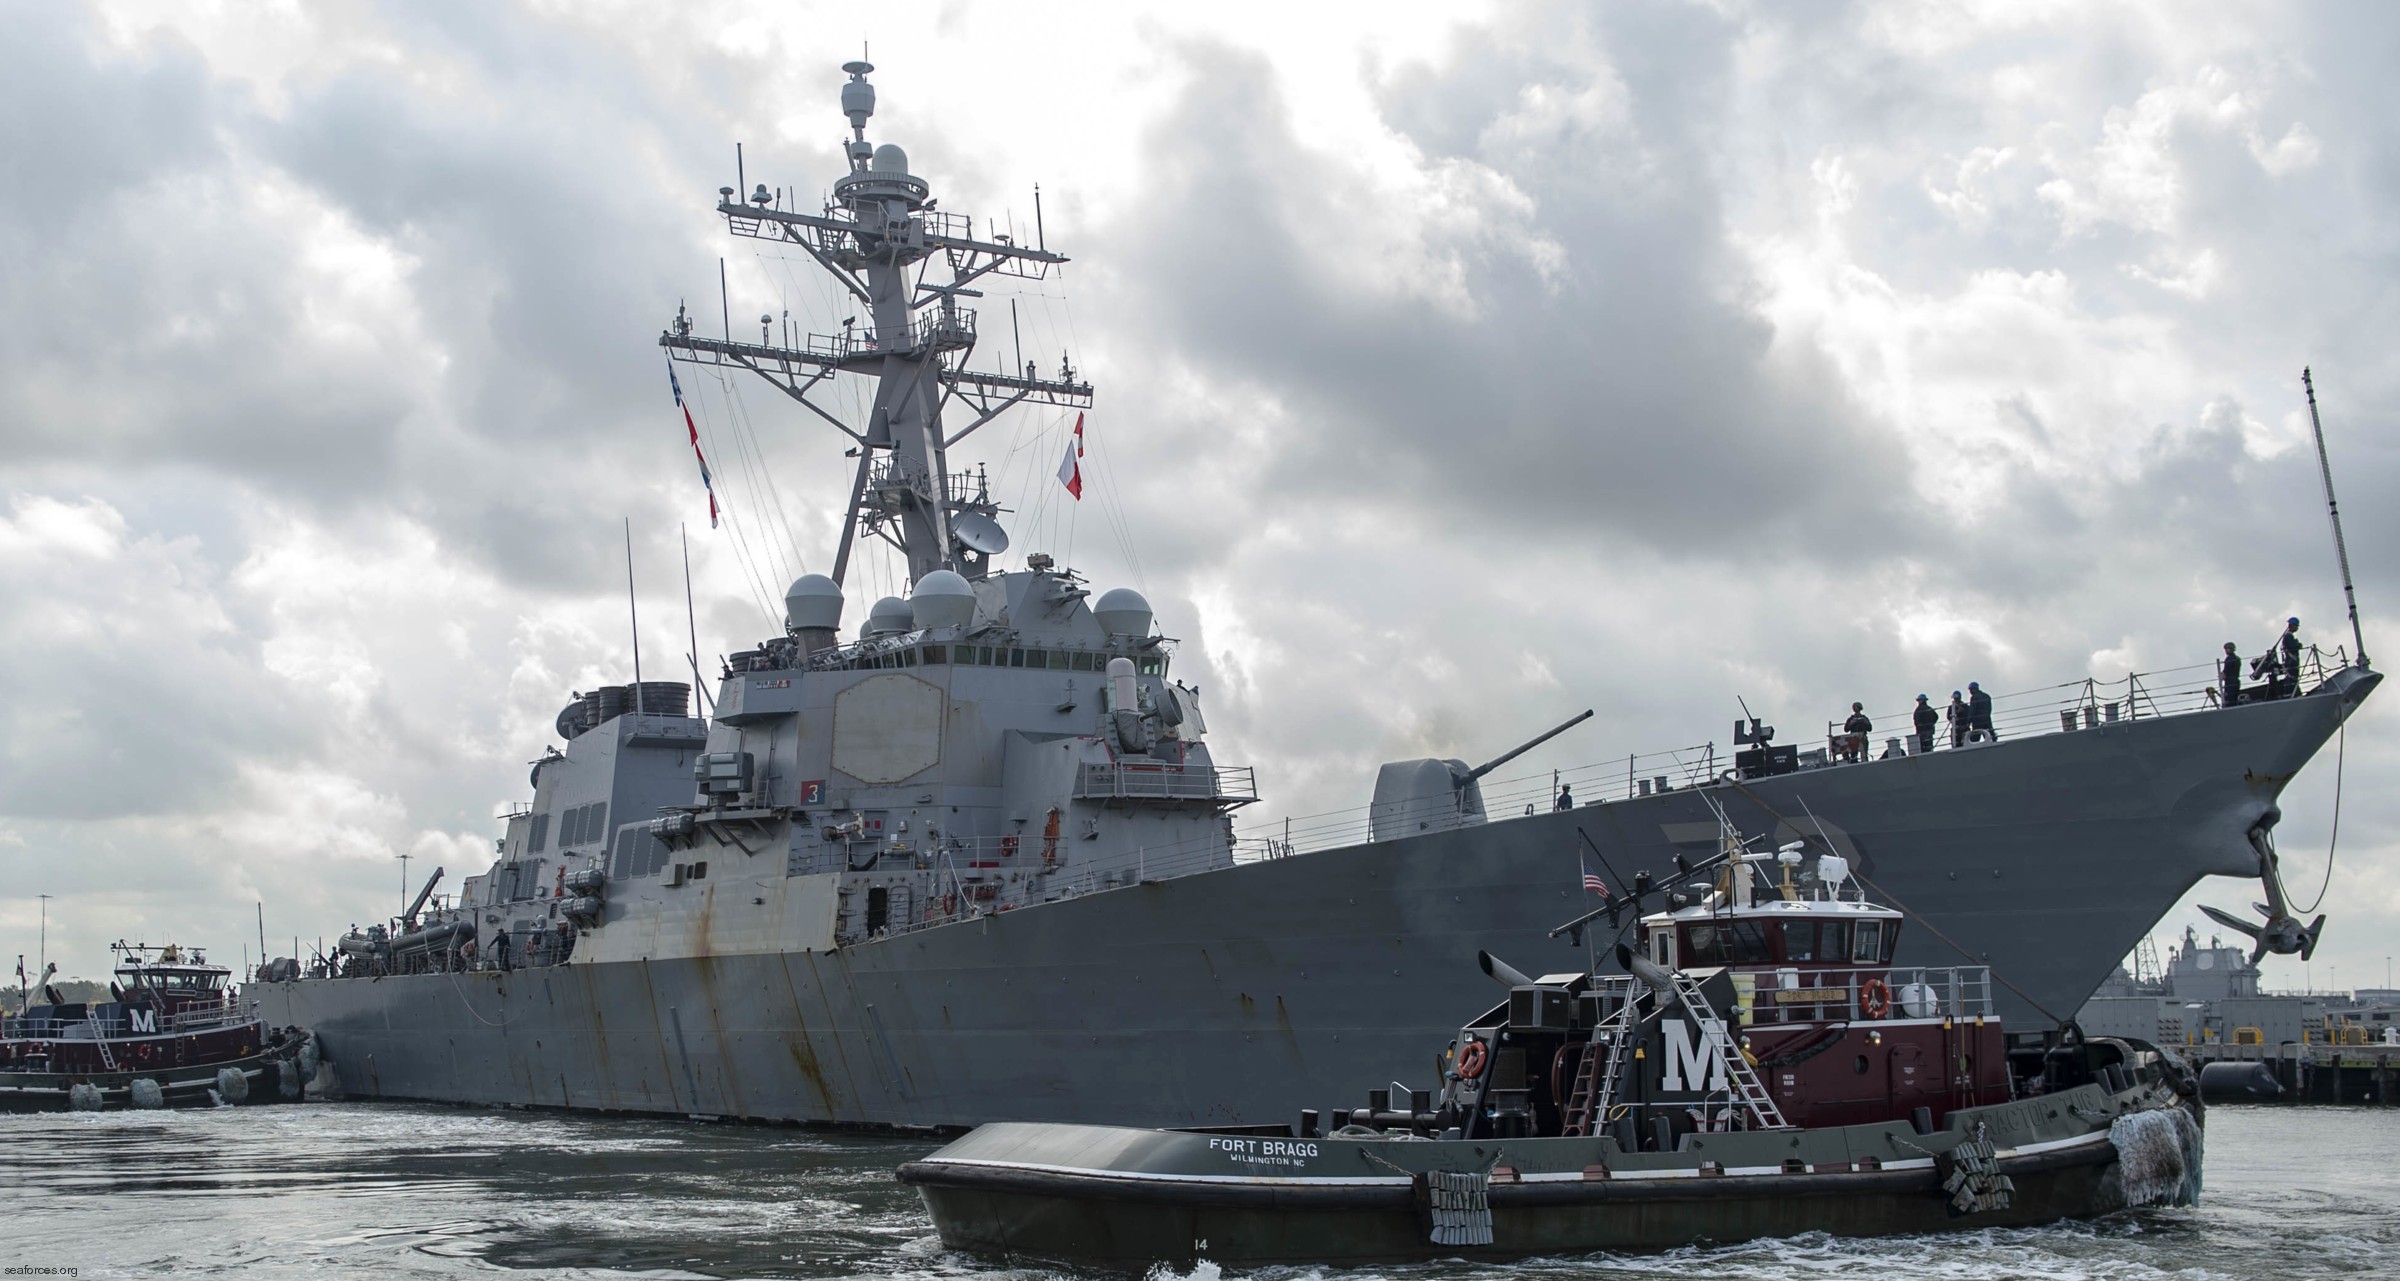 ddg-72 uss mahan guided missile destroyer arleigh burke class aegis bmd 04